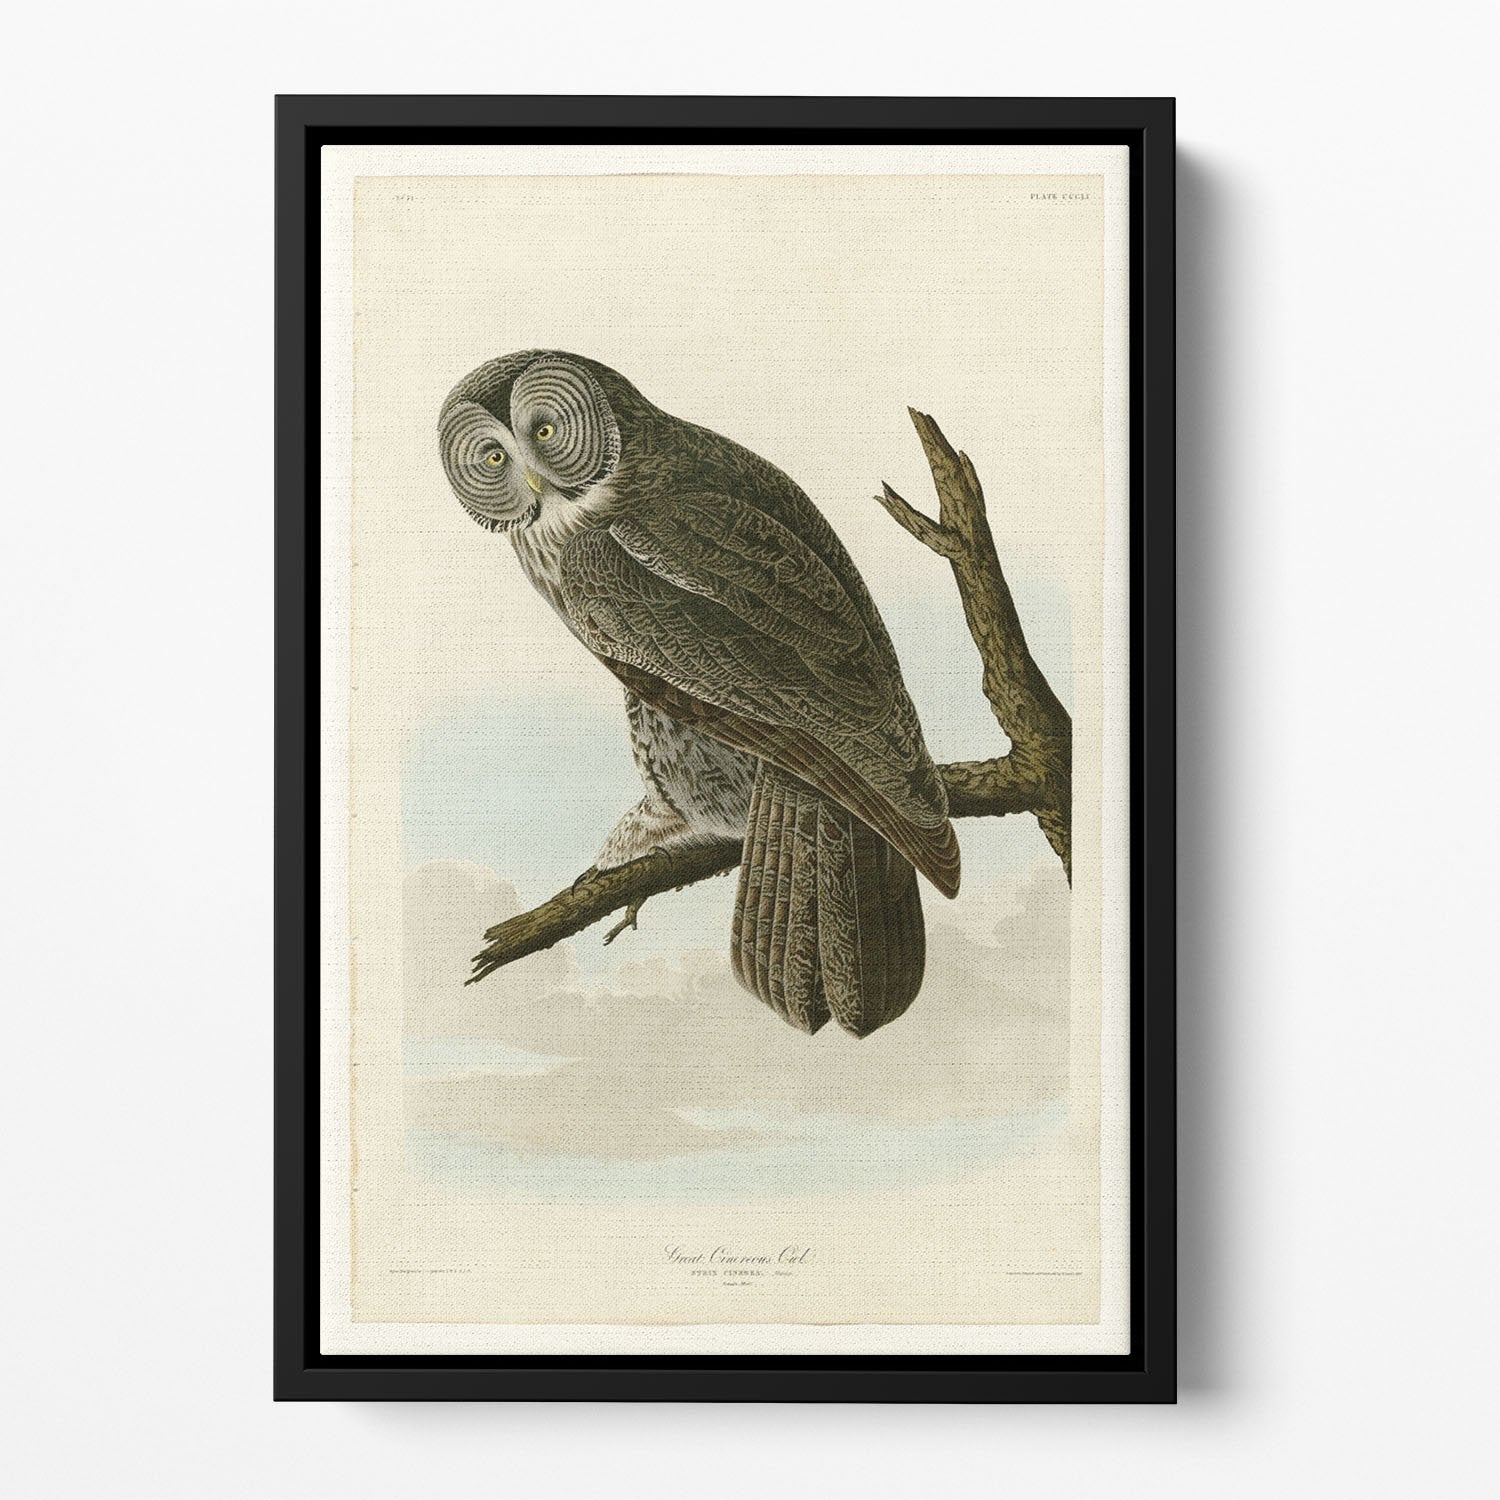 Great Cinereous Owl by Audubon Floating Framed Canvas